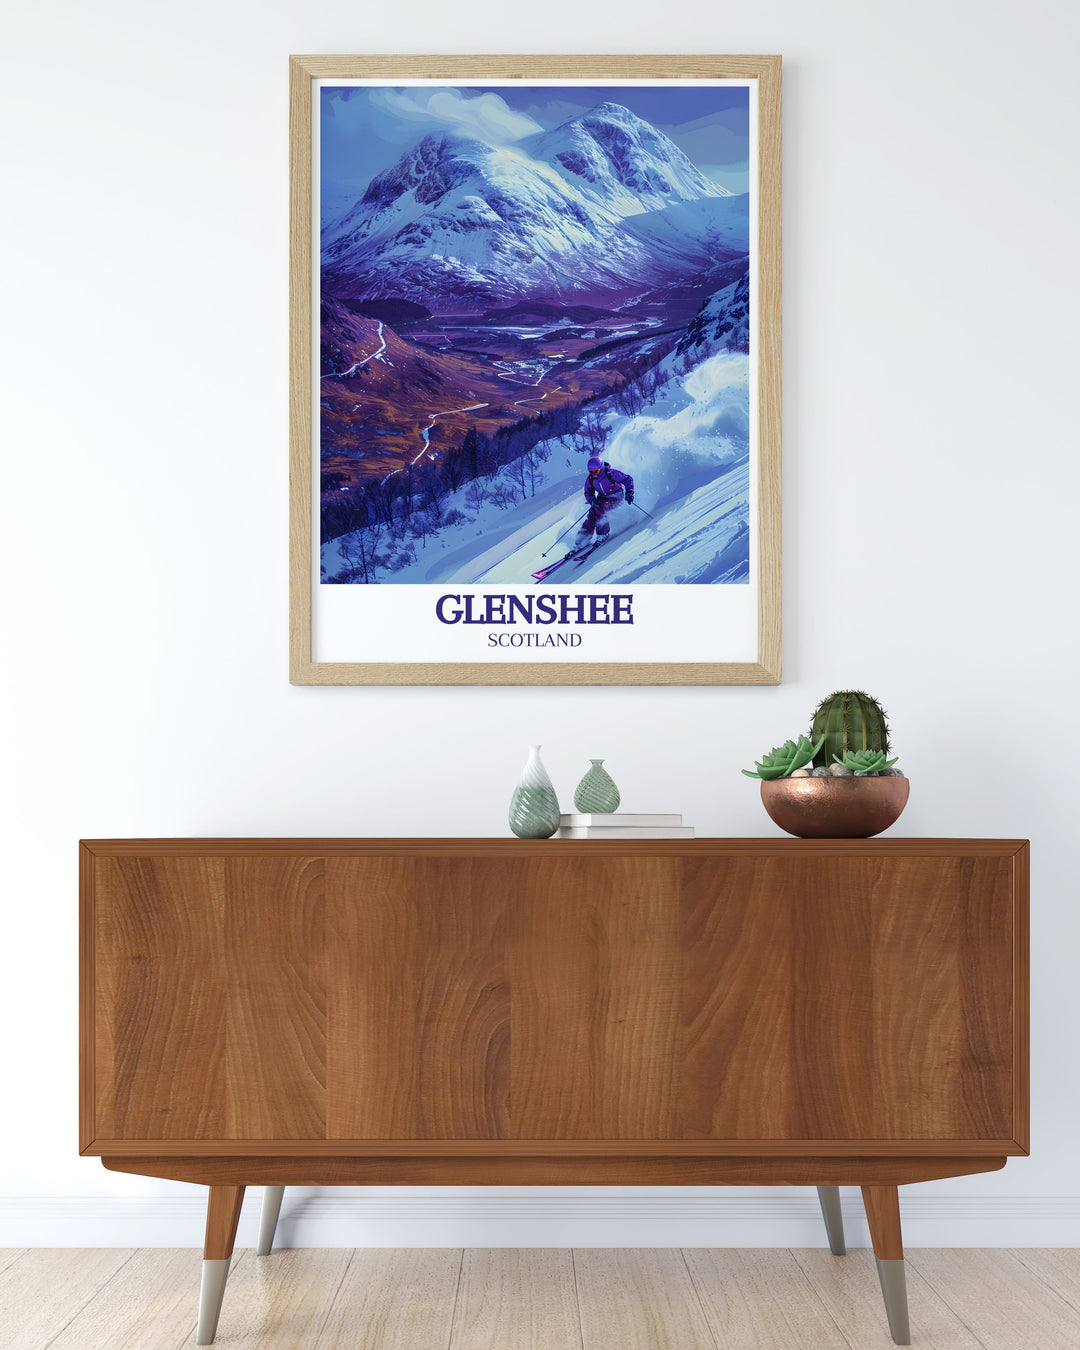 Featuring the breathtaking views of the Grampian Mountains, this travel poster captures their dramatic peaks and serene valleys. Ideal for those who love the outdoors, this artwork brings the natural beauty of Scotland into your decor.